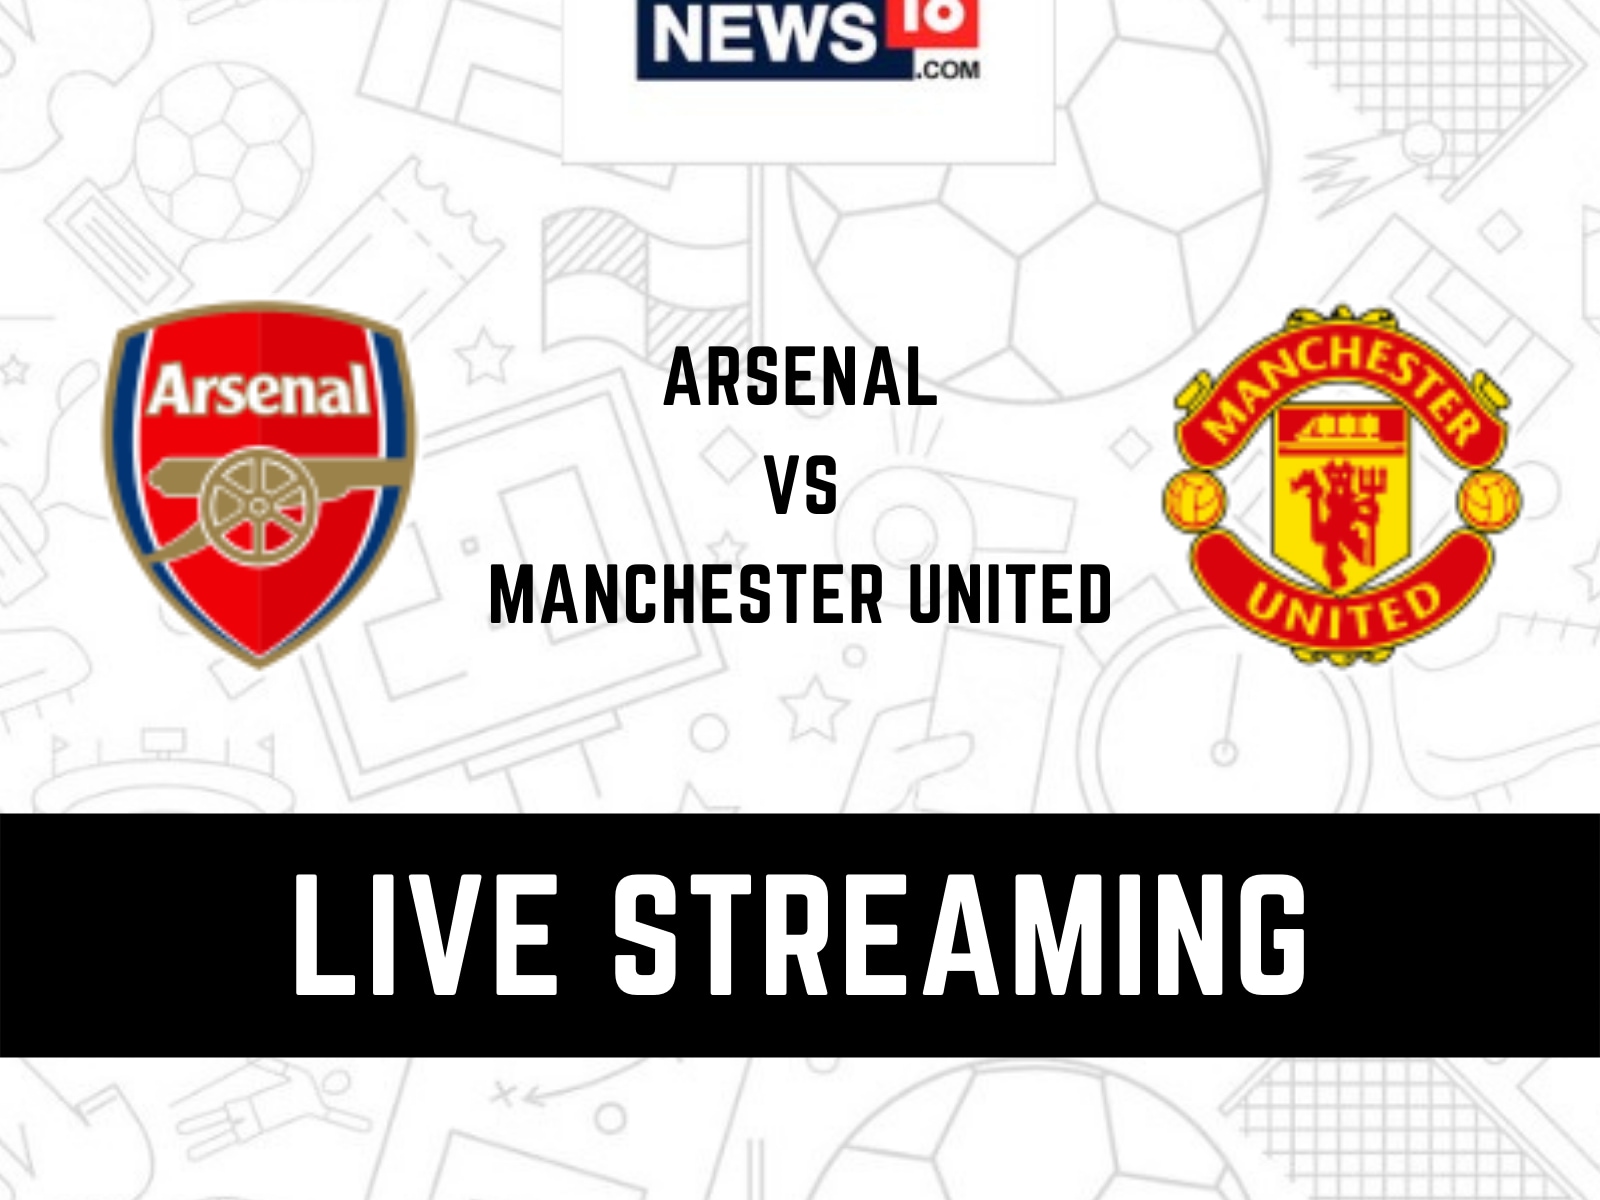 Arsenal vs Manchester United Live Streaming When and Where to Watch English Premier League Live Coverage on Live TV Online